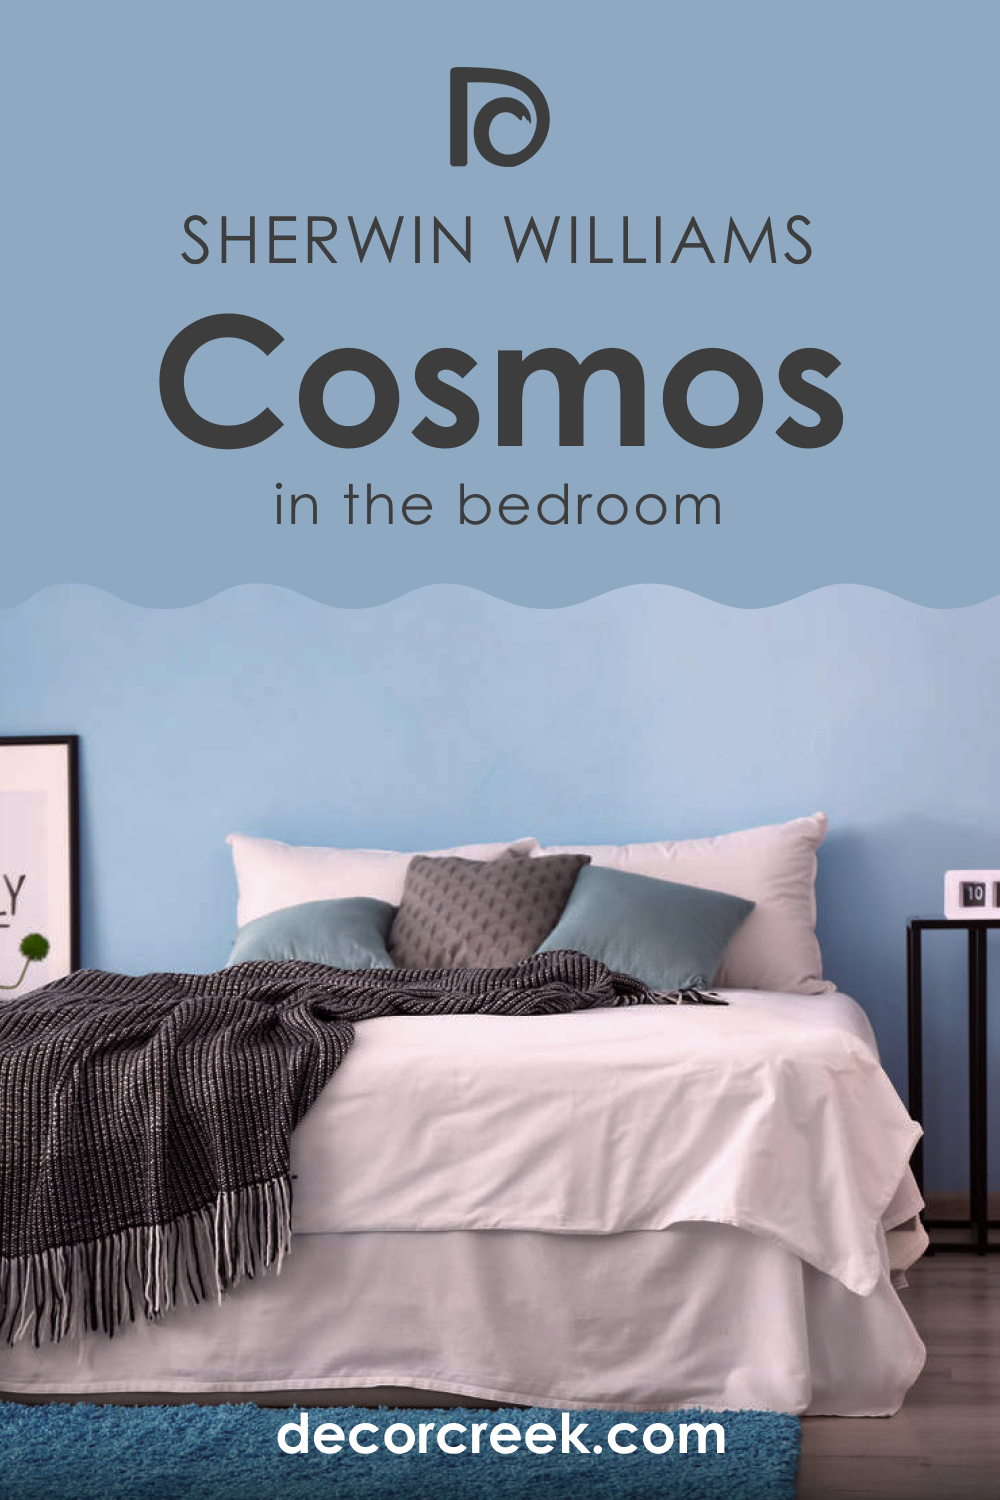 How to Use SW 6528 Cosmos in the Bedroom?